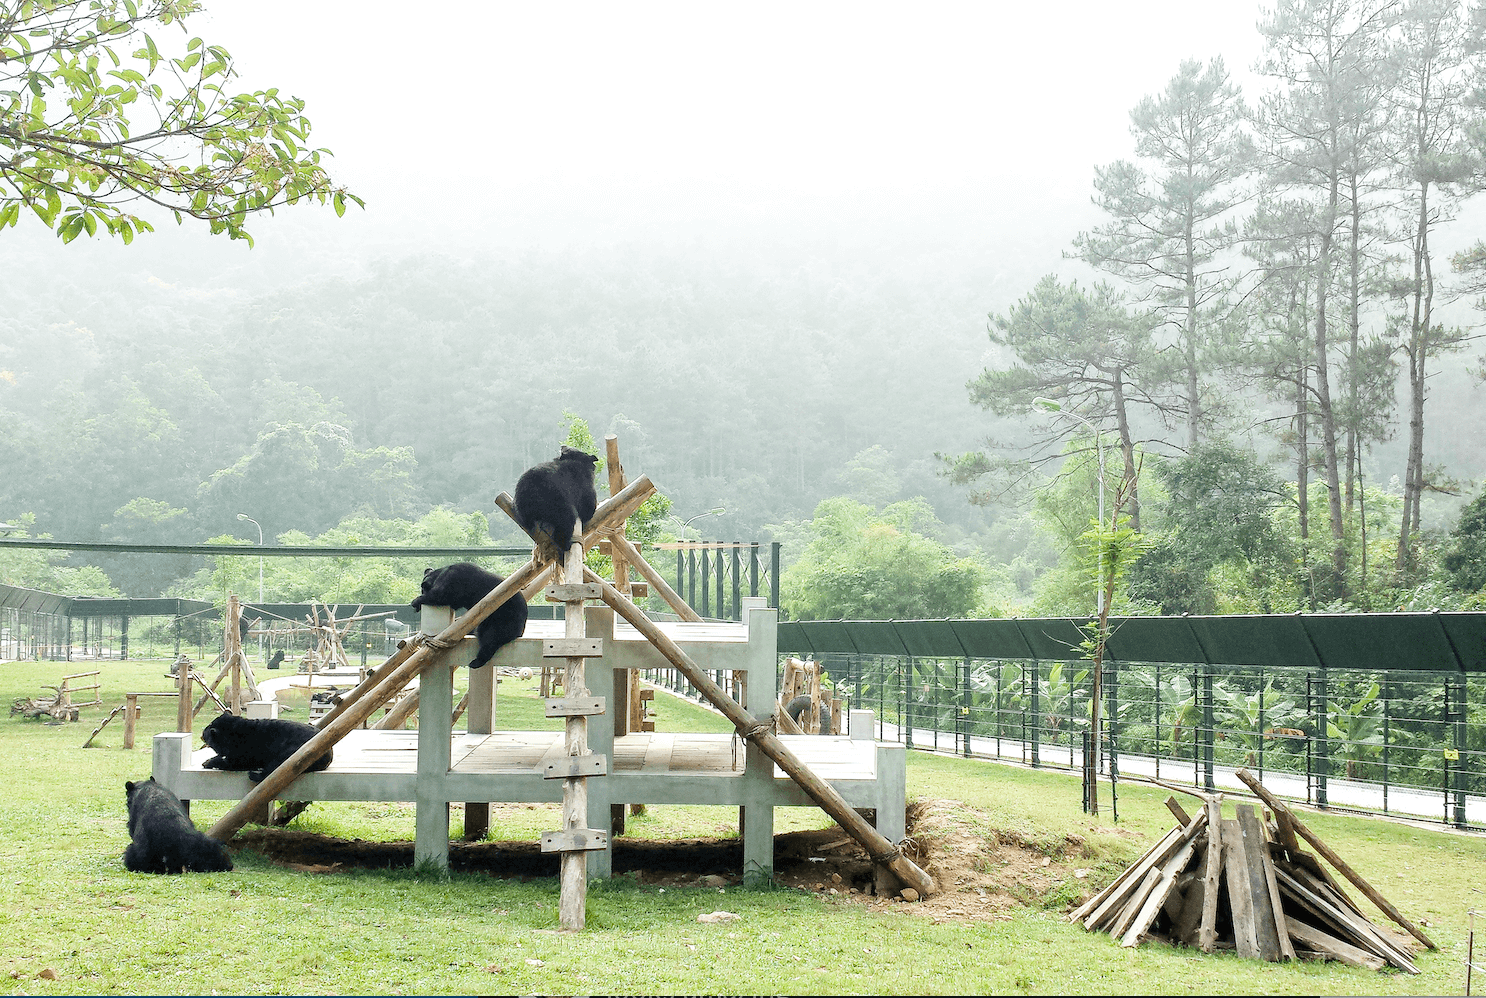 Bears playing at an animal sanctuary in Vietnam